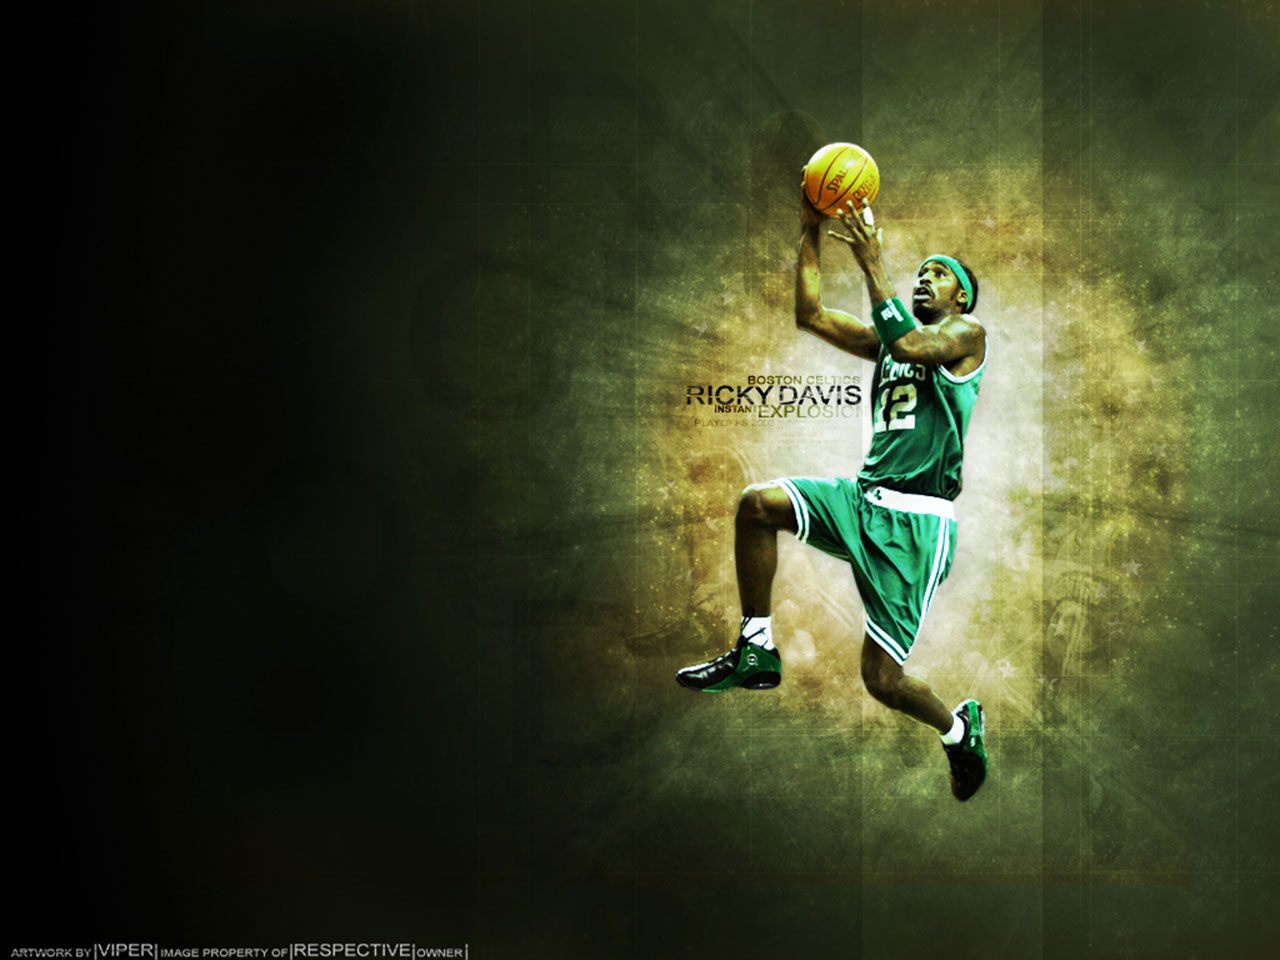  the first one is wallpaper of him going for layup in Celtics jersey with 